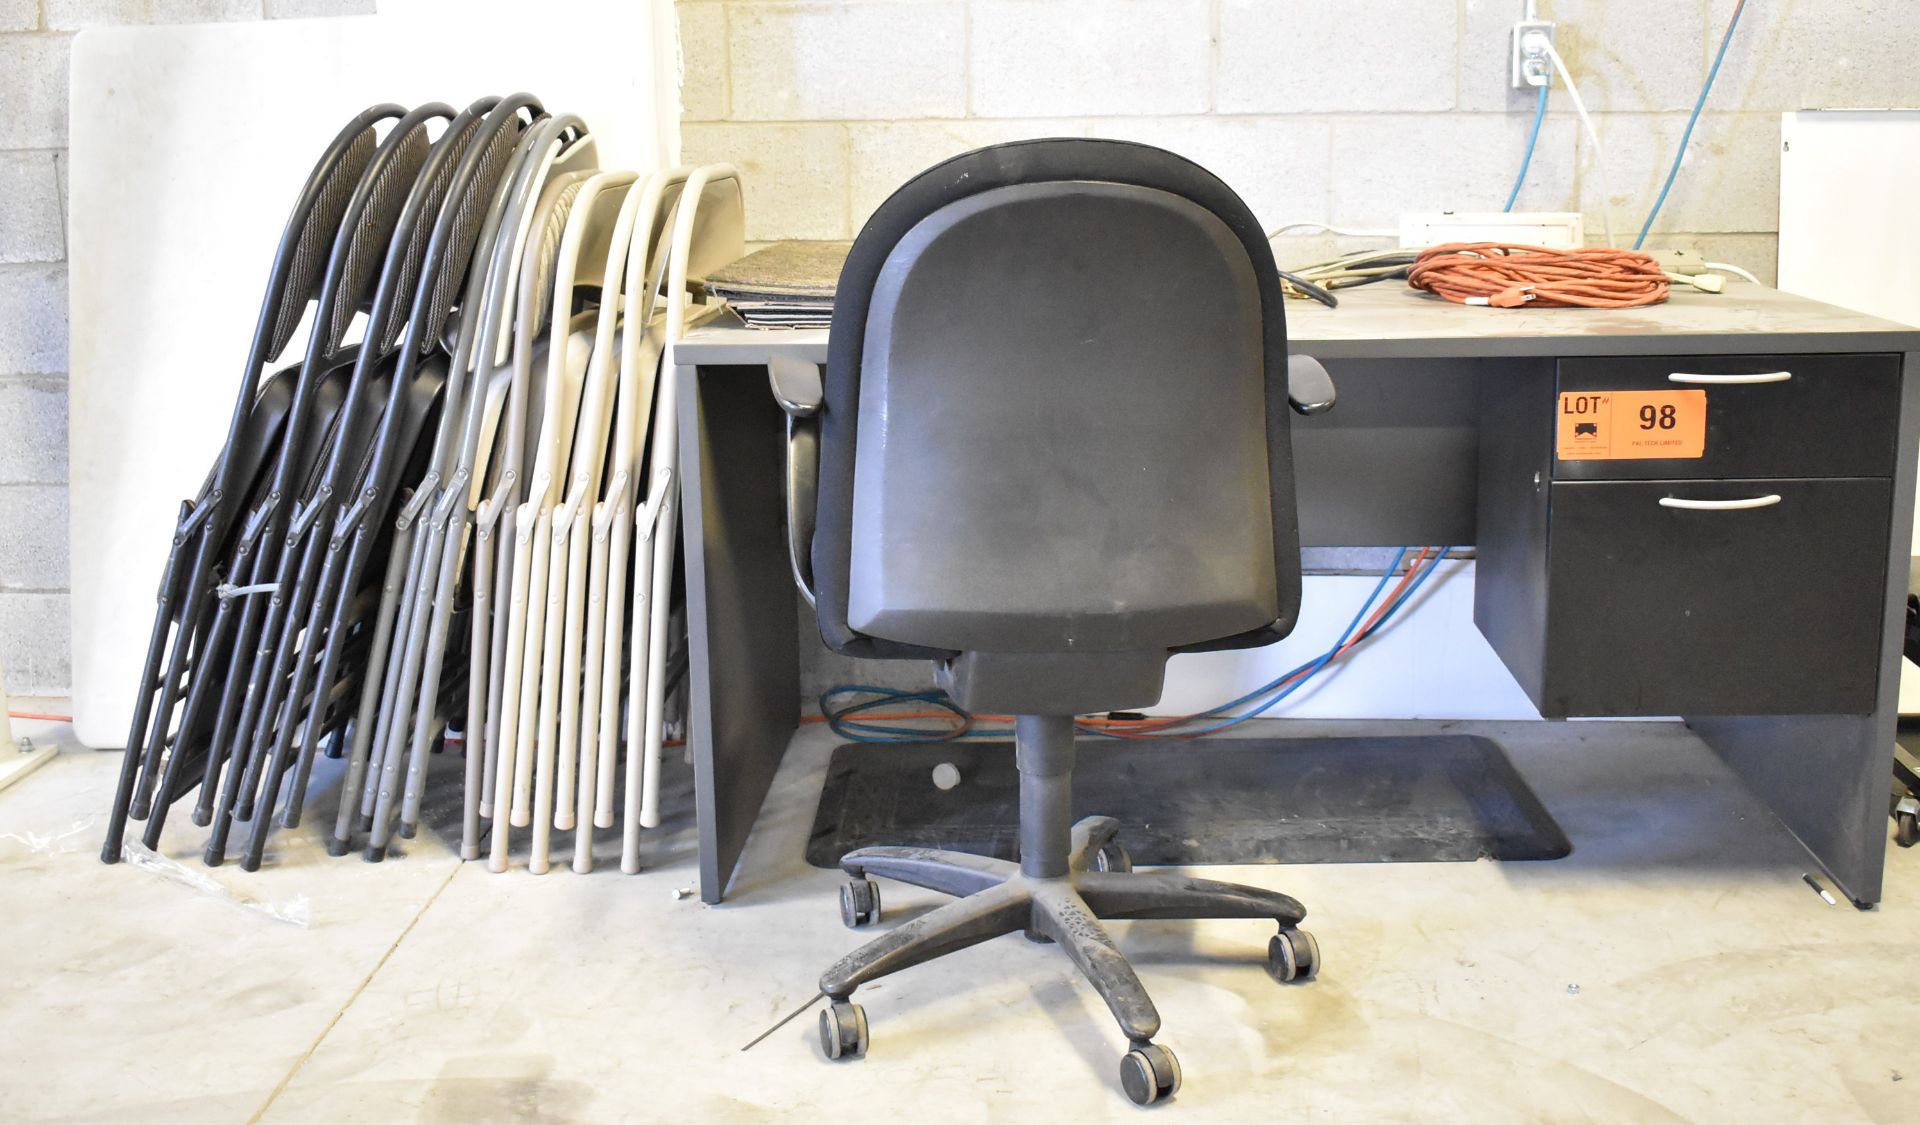 LOT/ OFFICE DESK, OFFICE CHAIR, FOLDING CHAIRS, TABLE AND POWER BARS